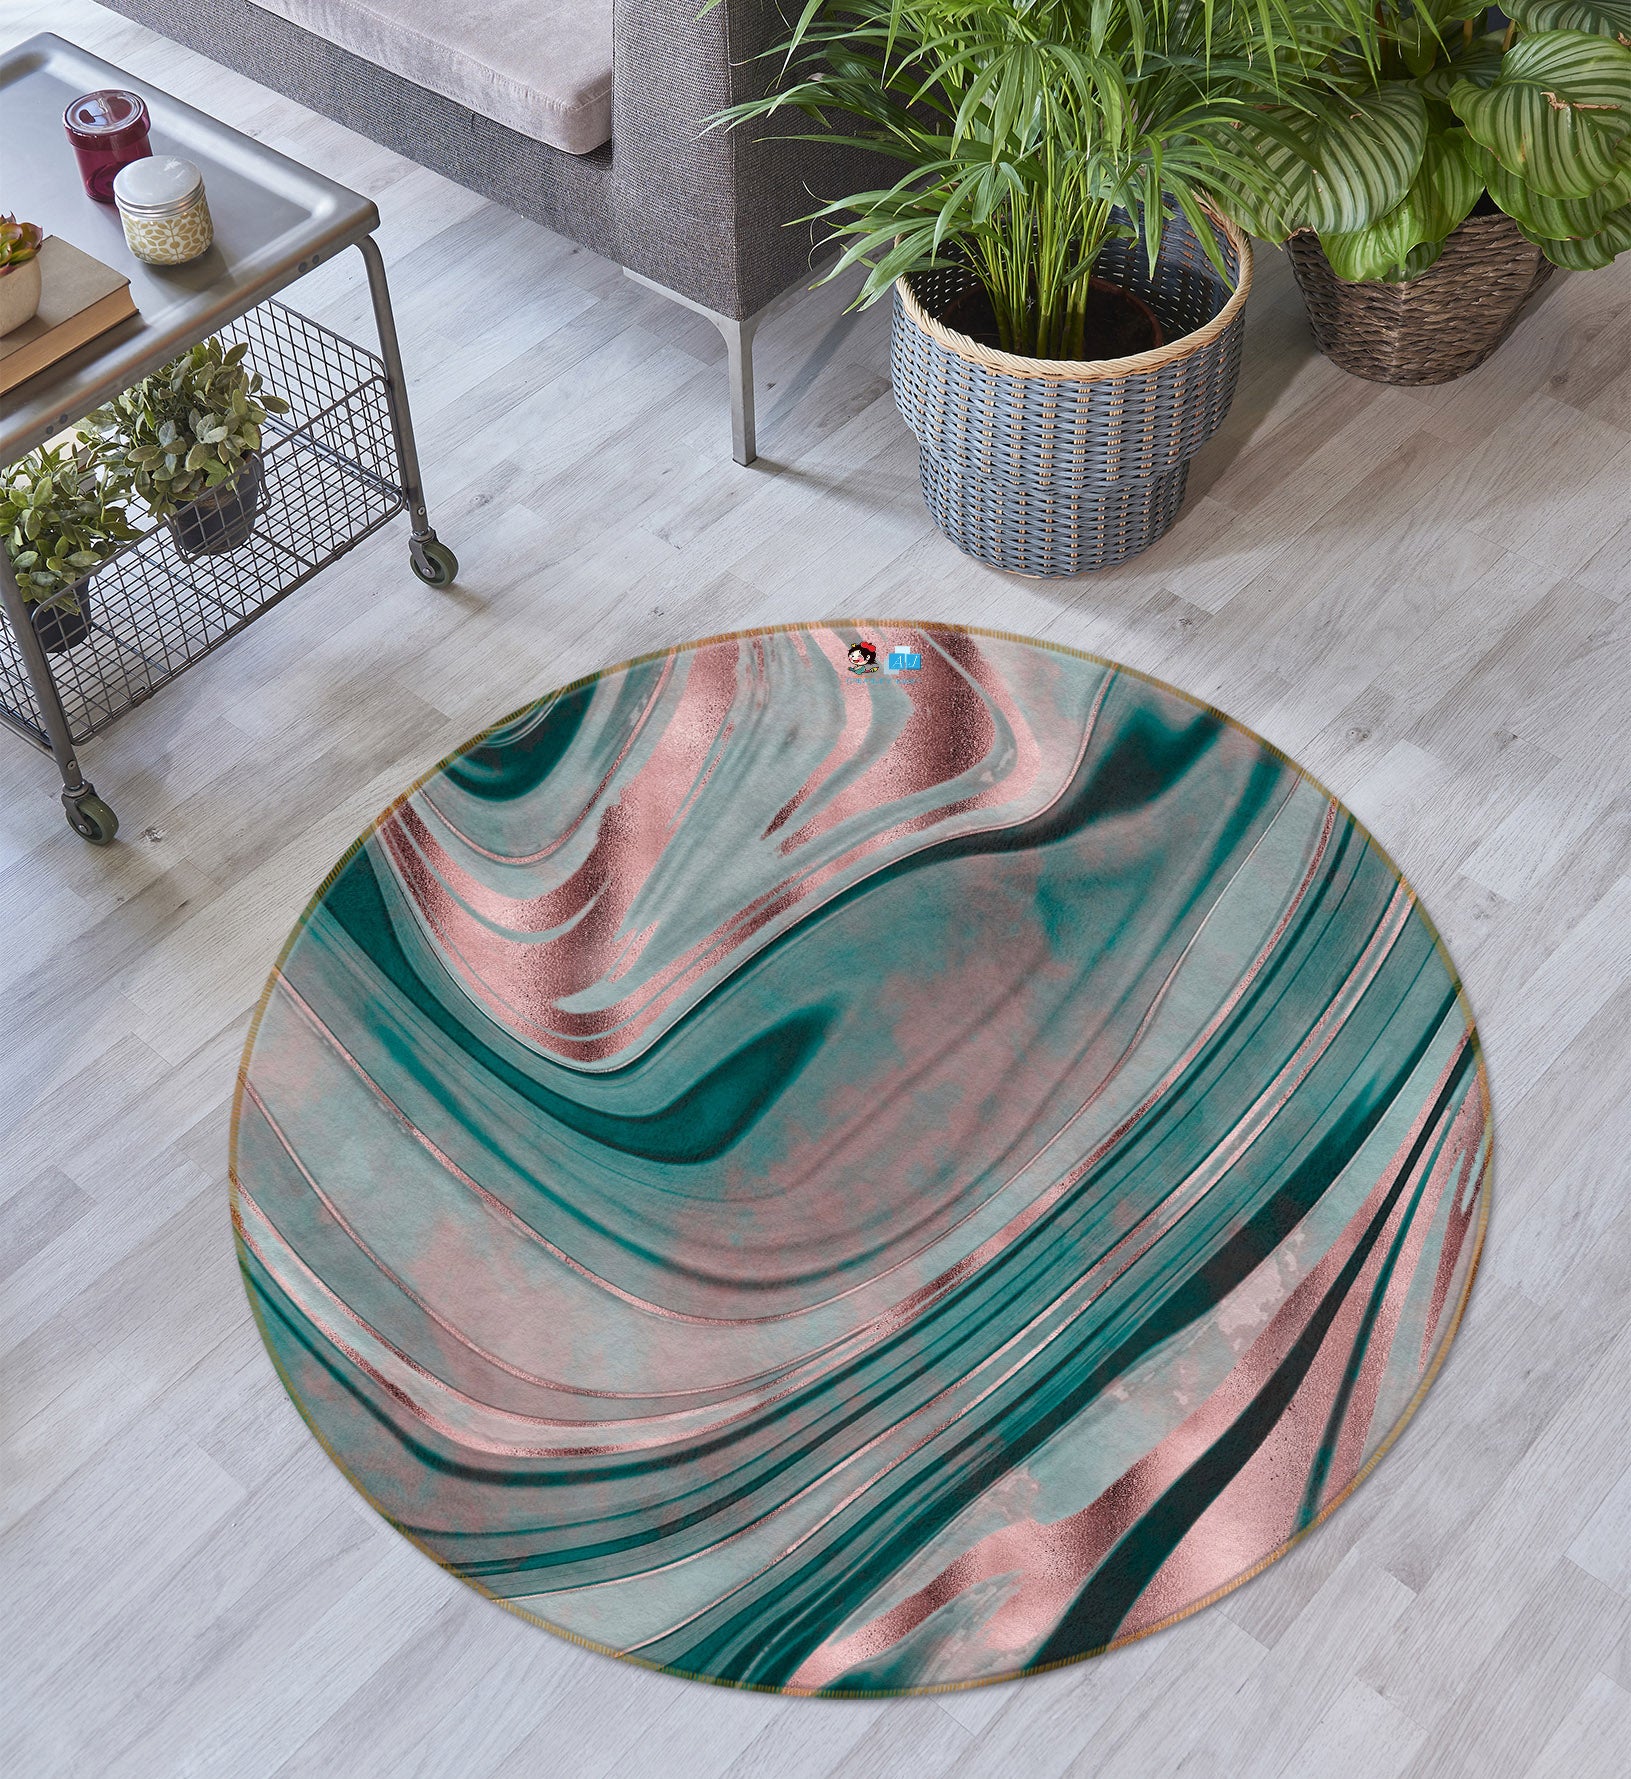 3D Texture Pattern 83062 Andrea haase Rug Round Non Slip Rug Mat